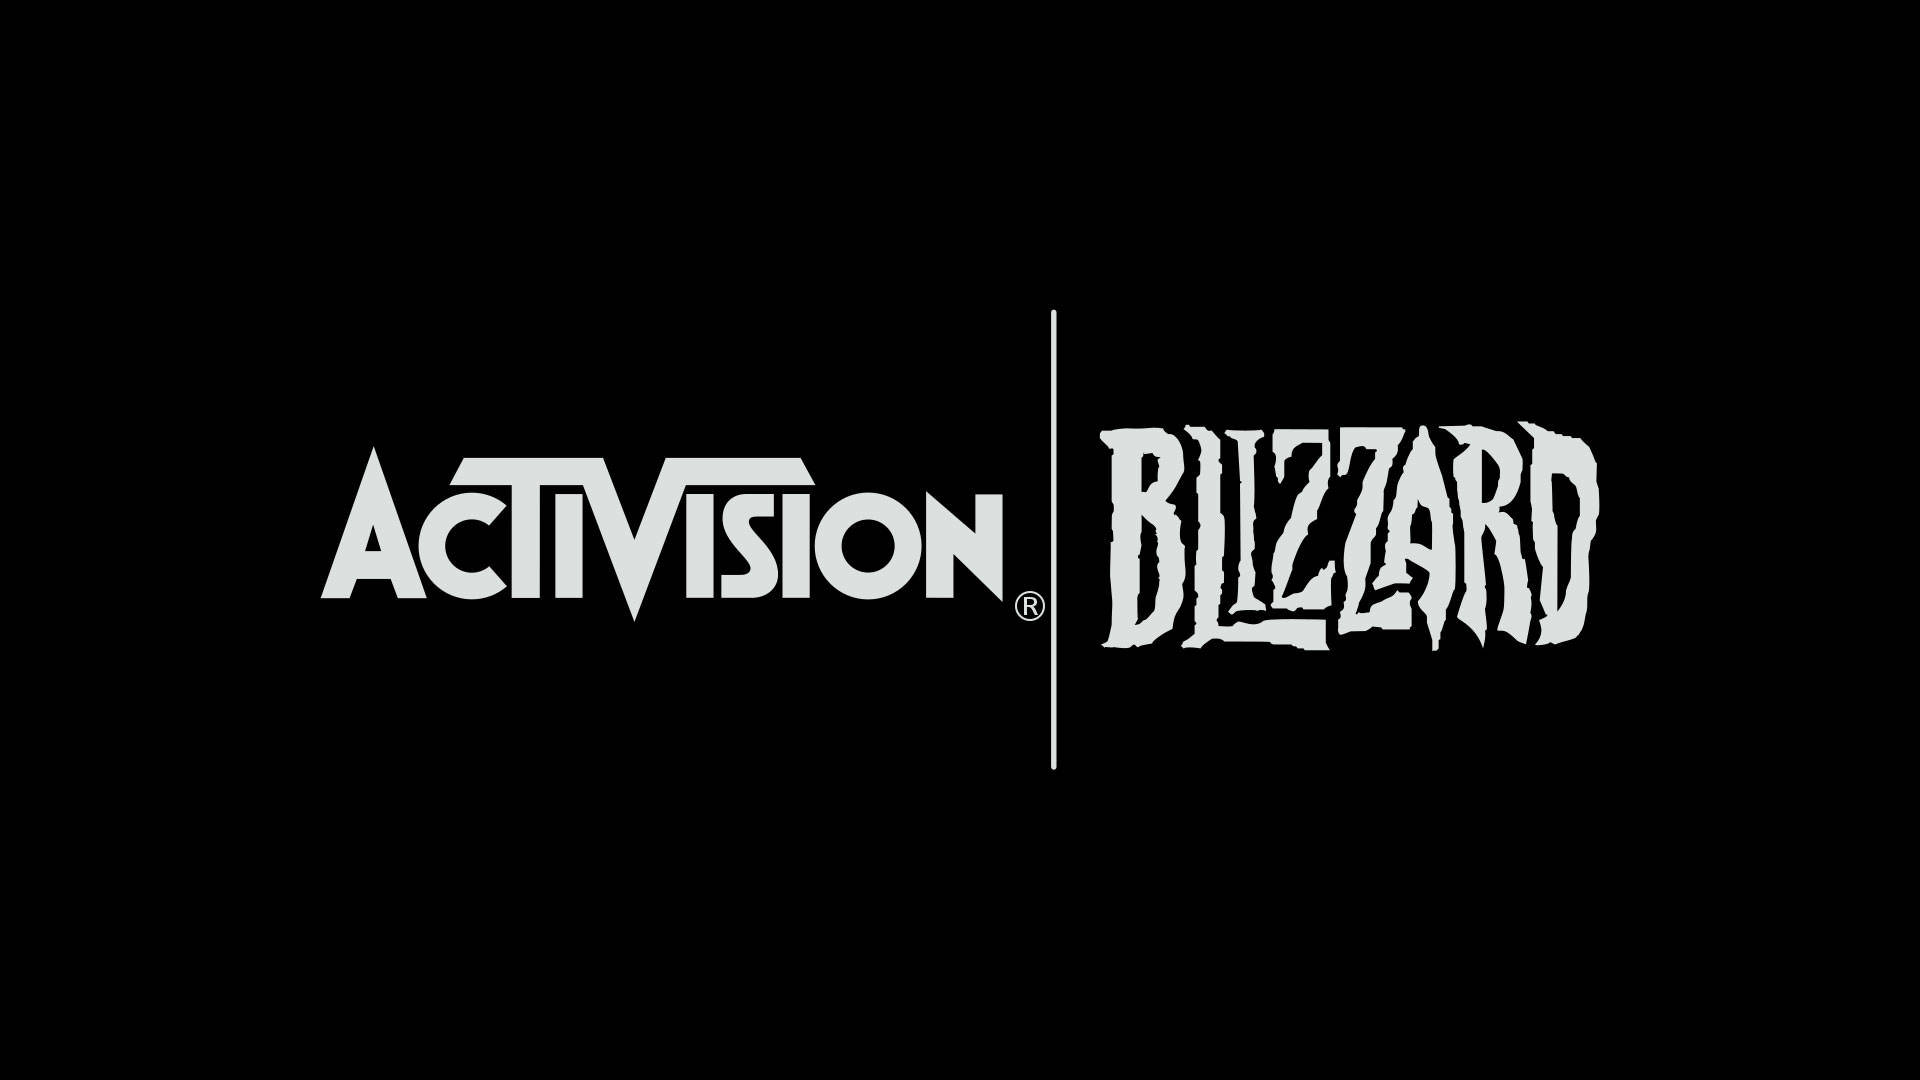 Image for Microsoft's Activision Blizzard deal approved by Brazilian regulator